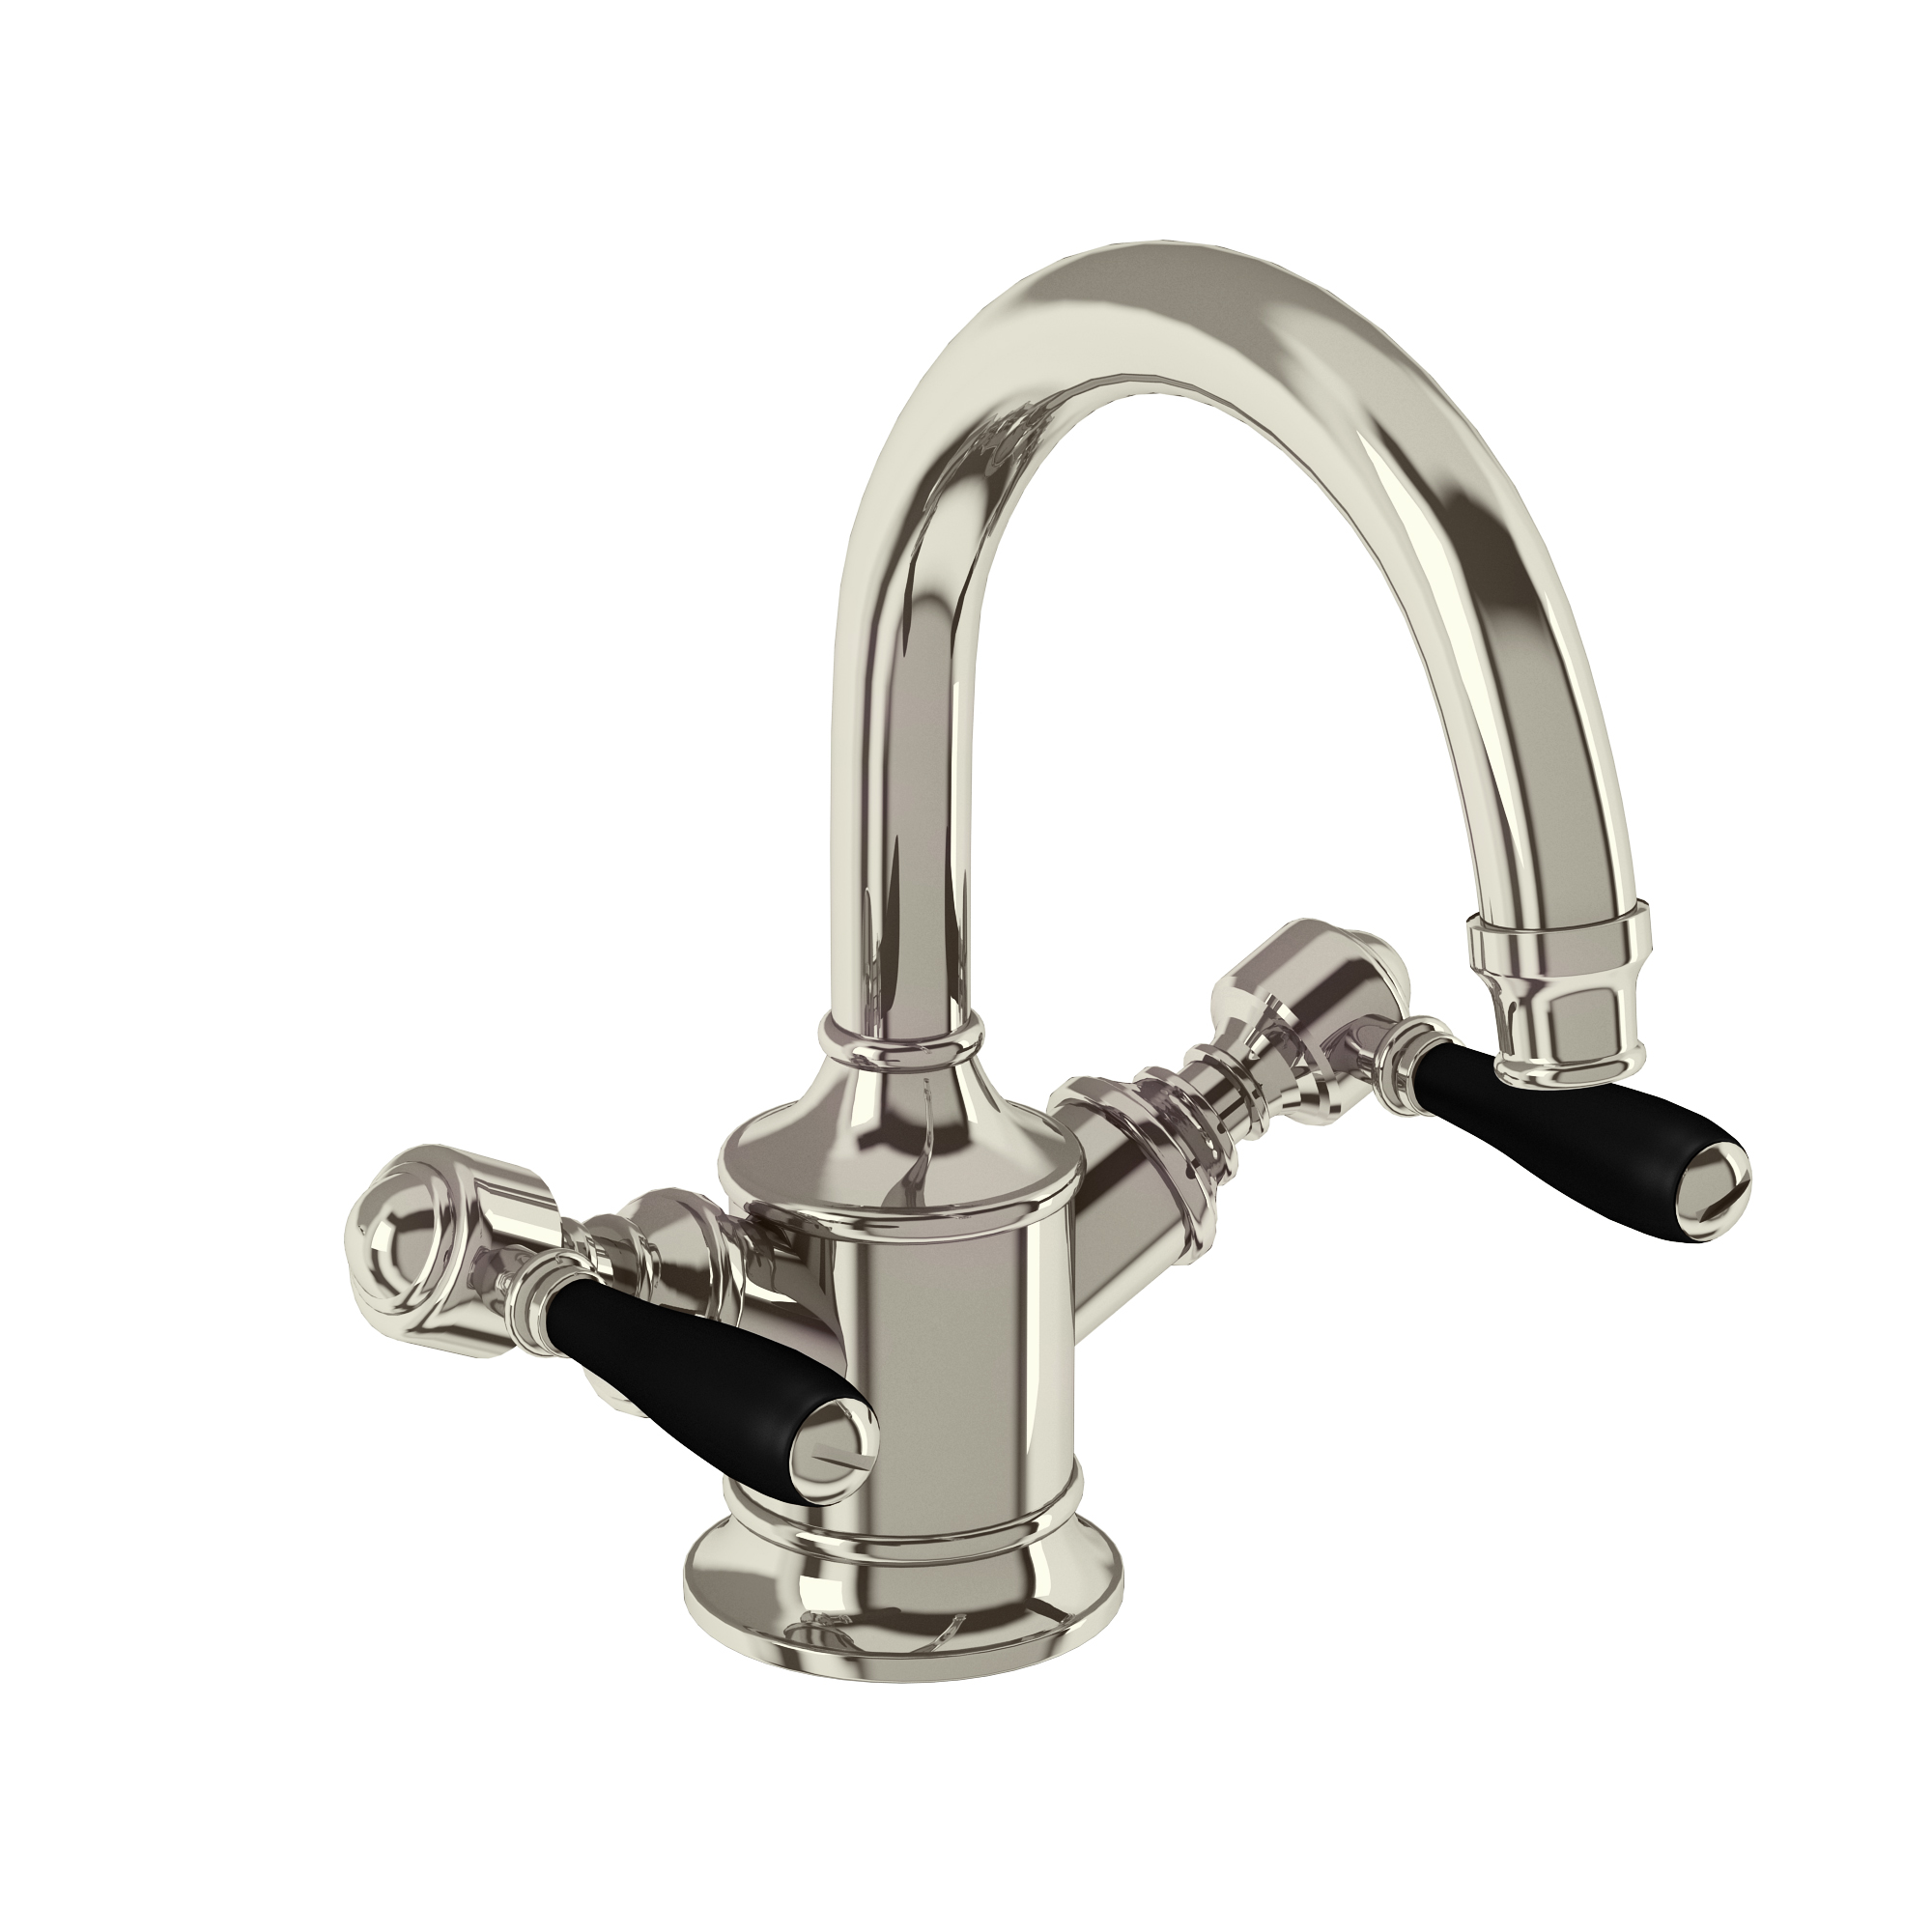 Arcade Dual-lever basin mixer without pop up waste - nickel - with black lever